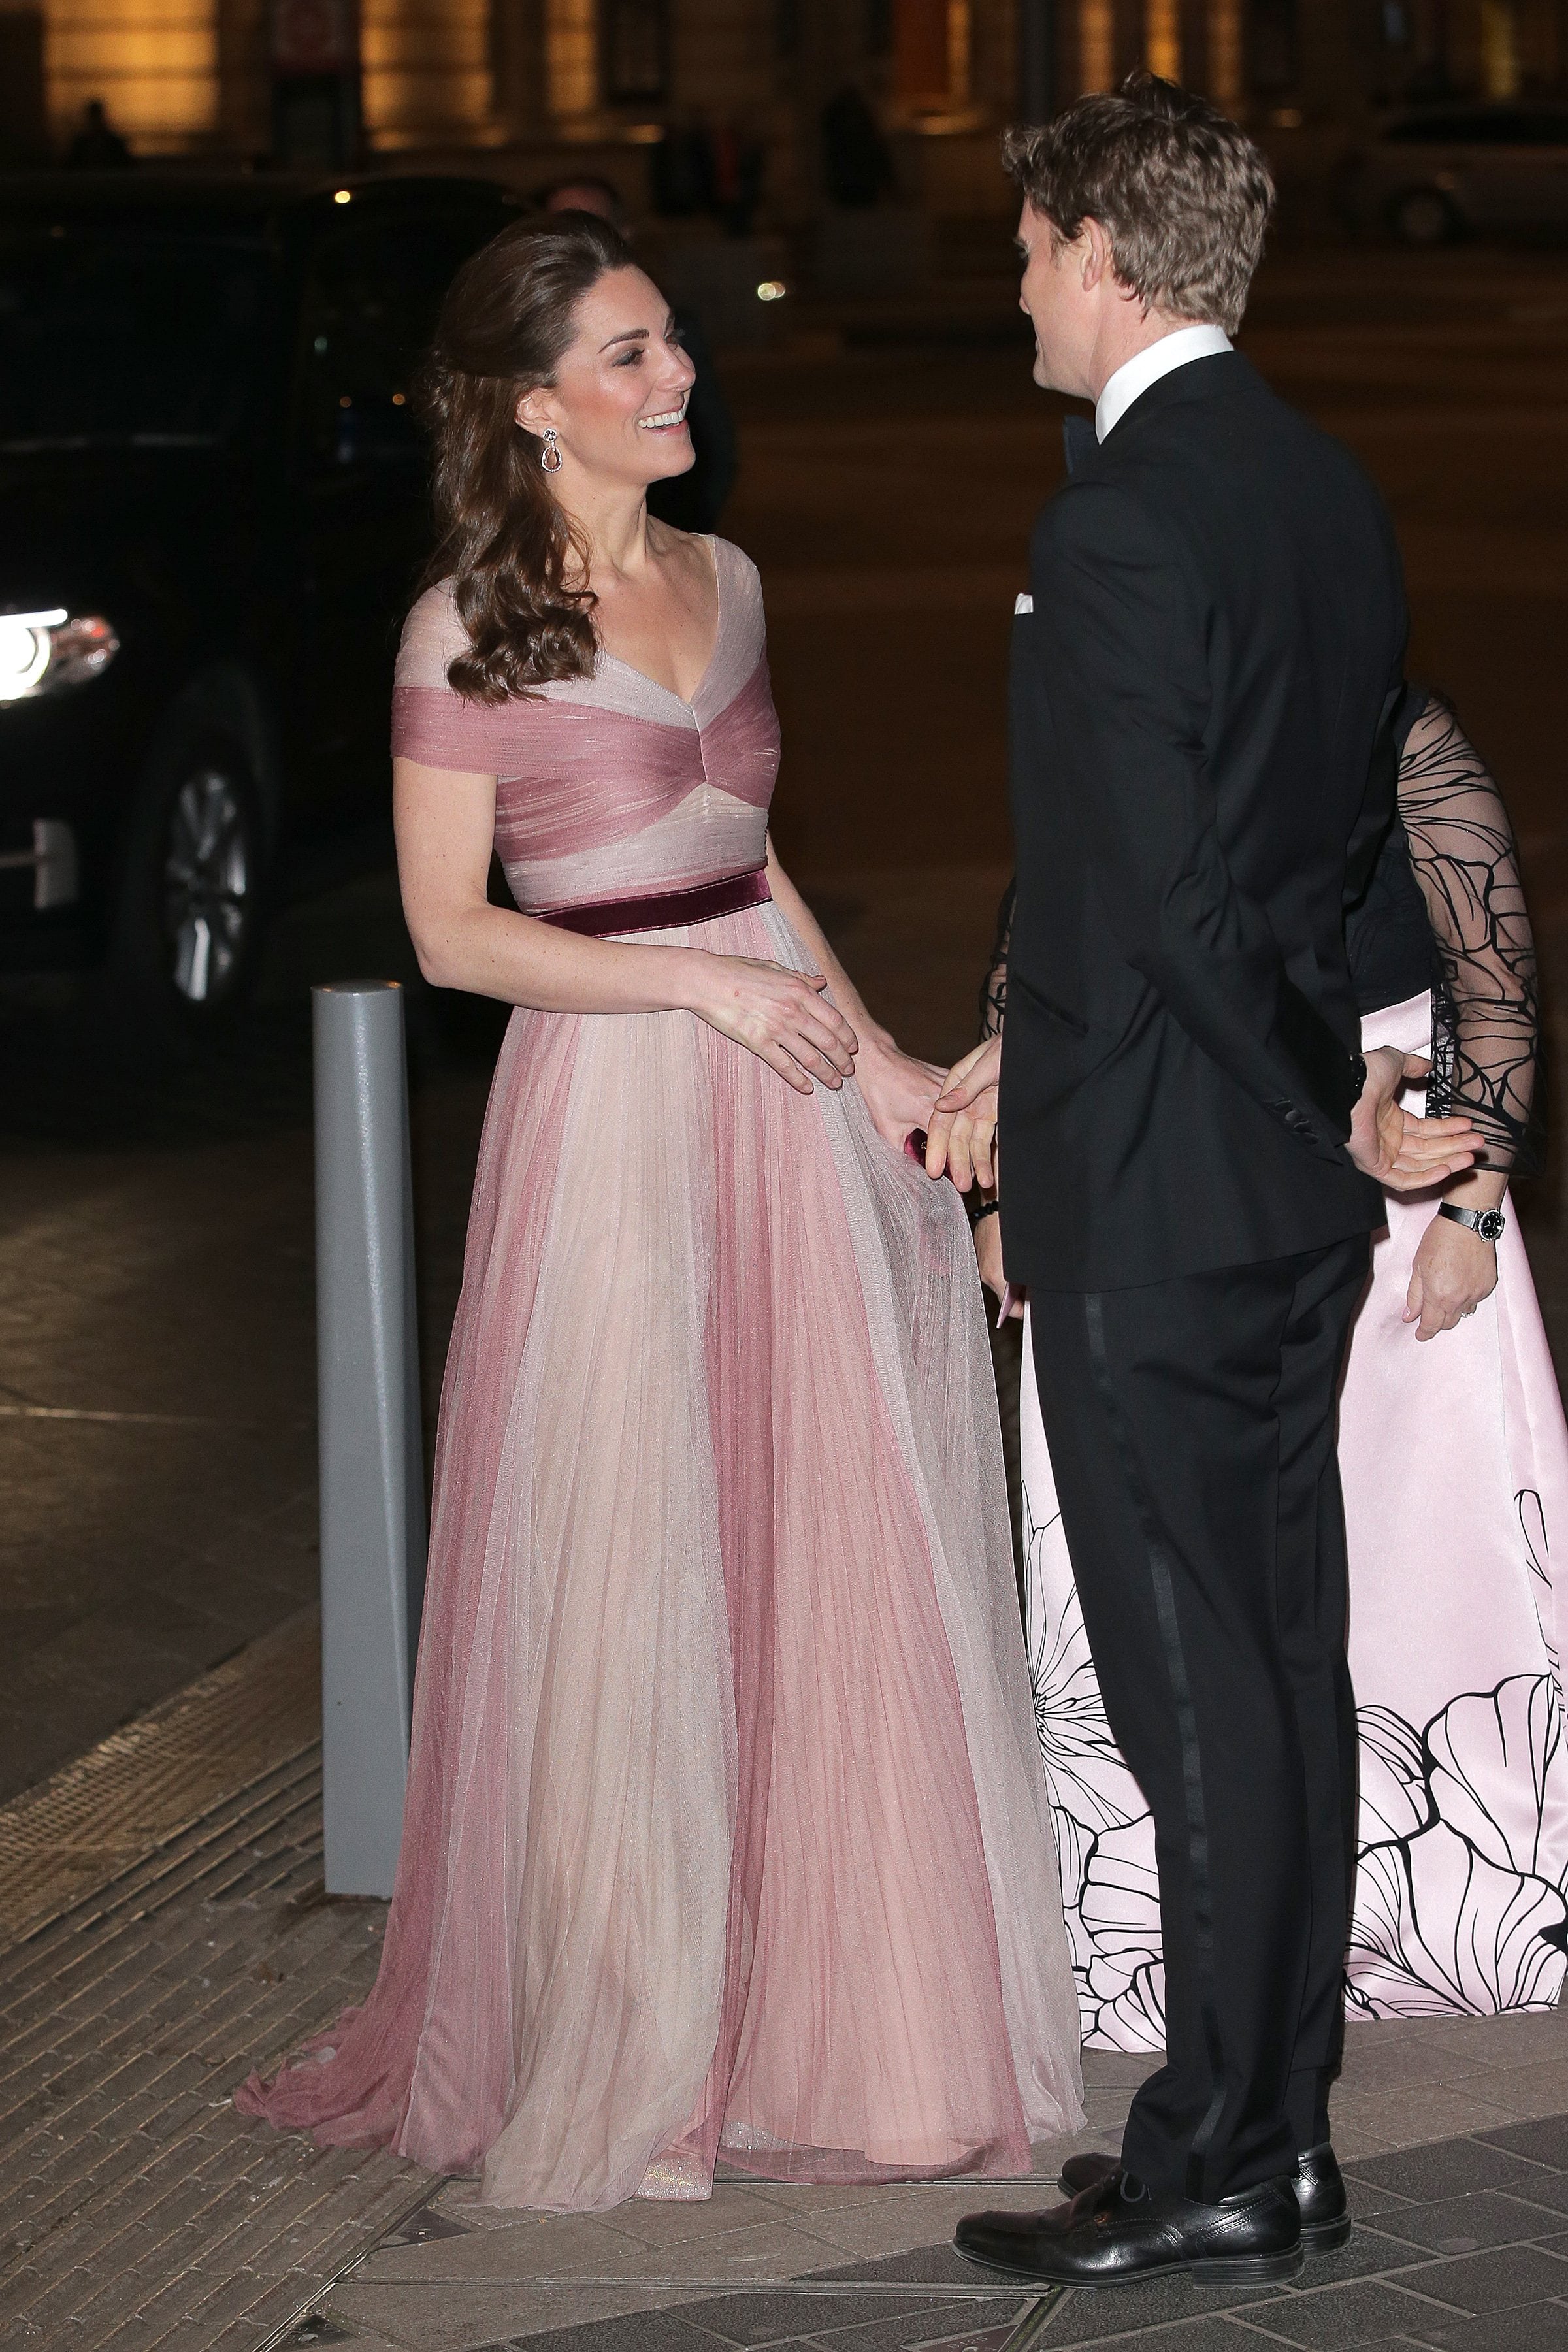 Kate Middleton stuns in Gucci at the '100 Women in Finance' gala